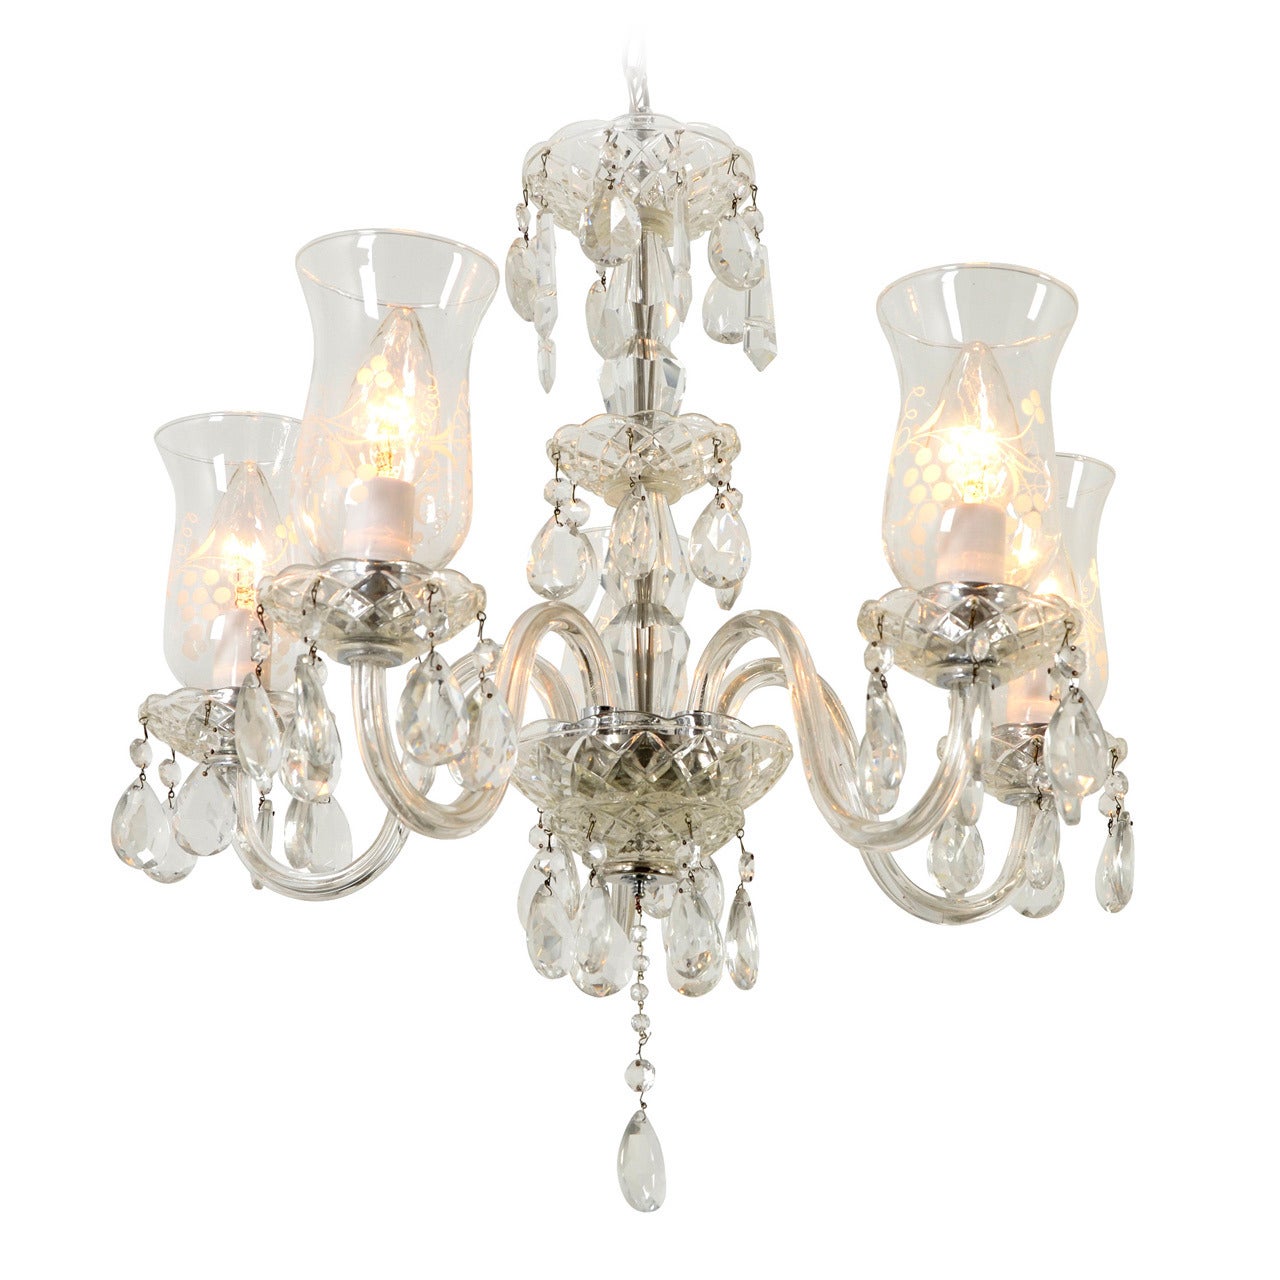 Late Colonial Revival Cut-Glass Chandelier, circa 1940